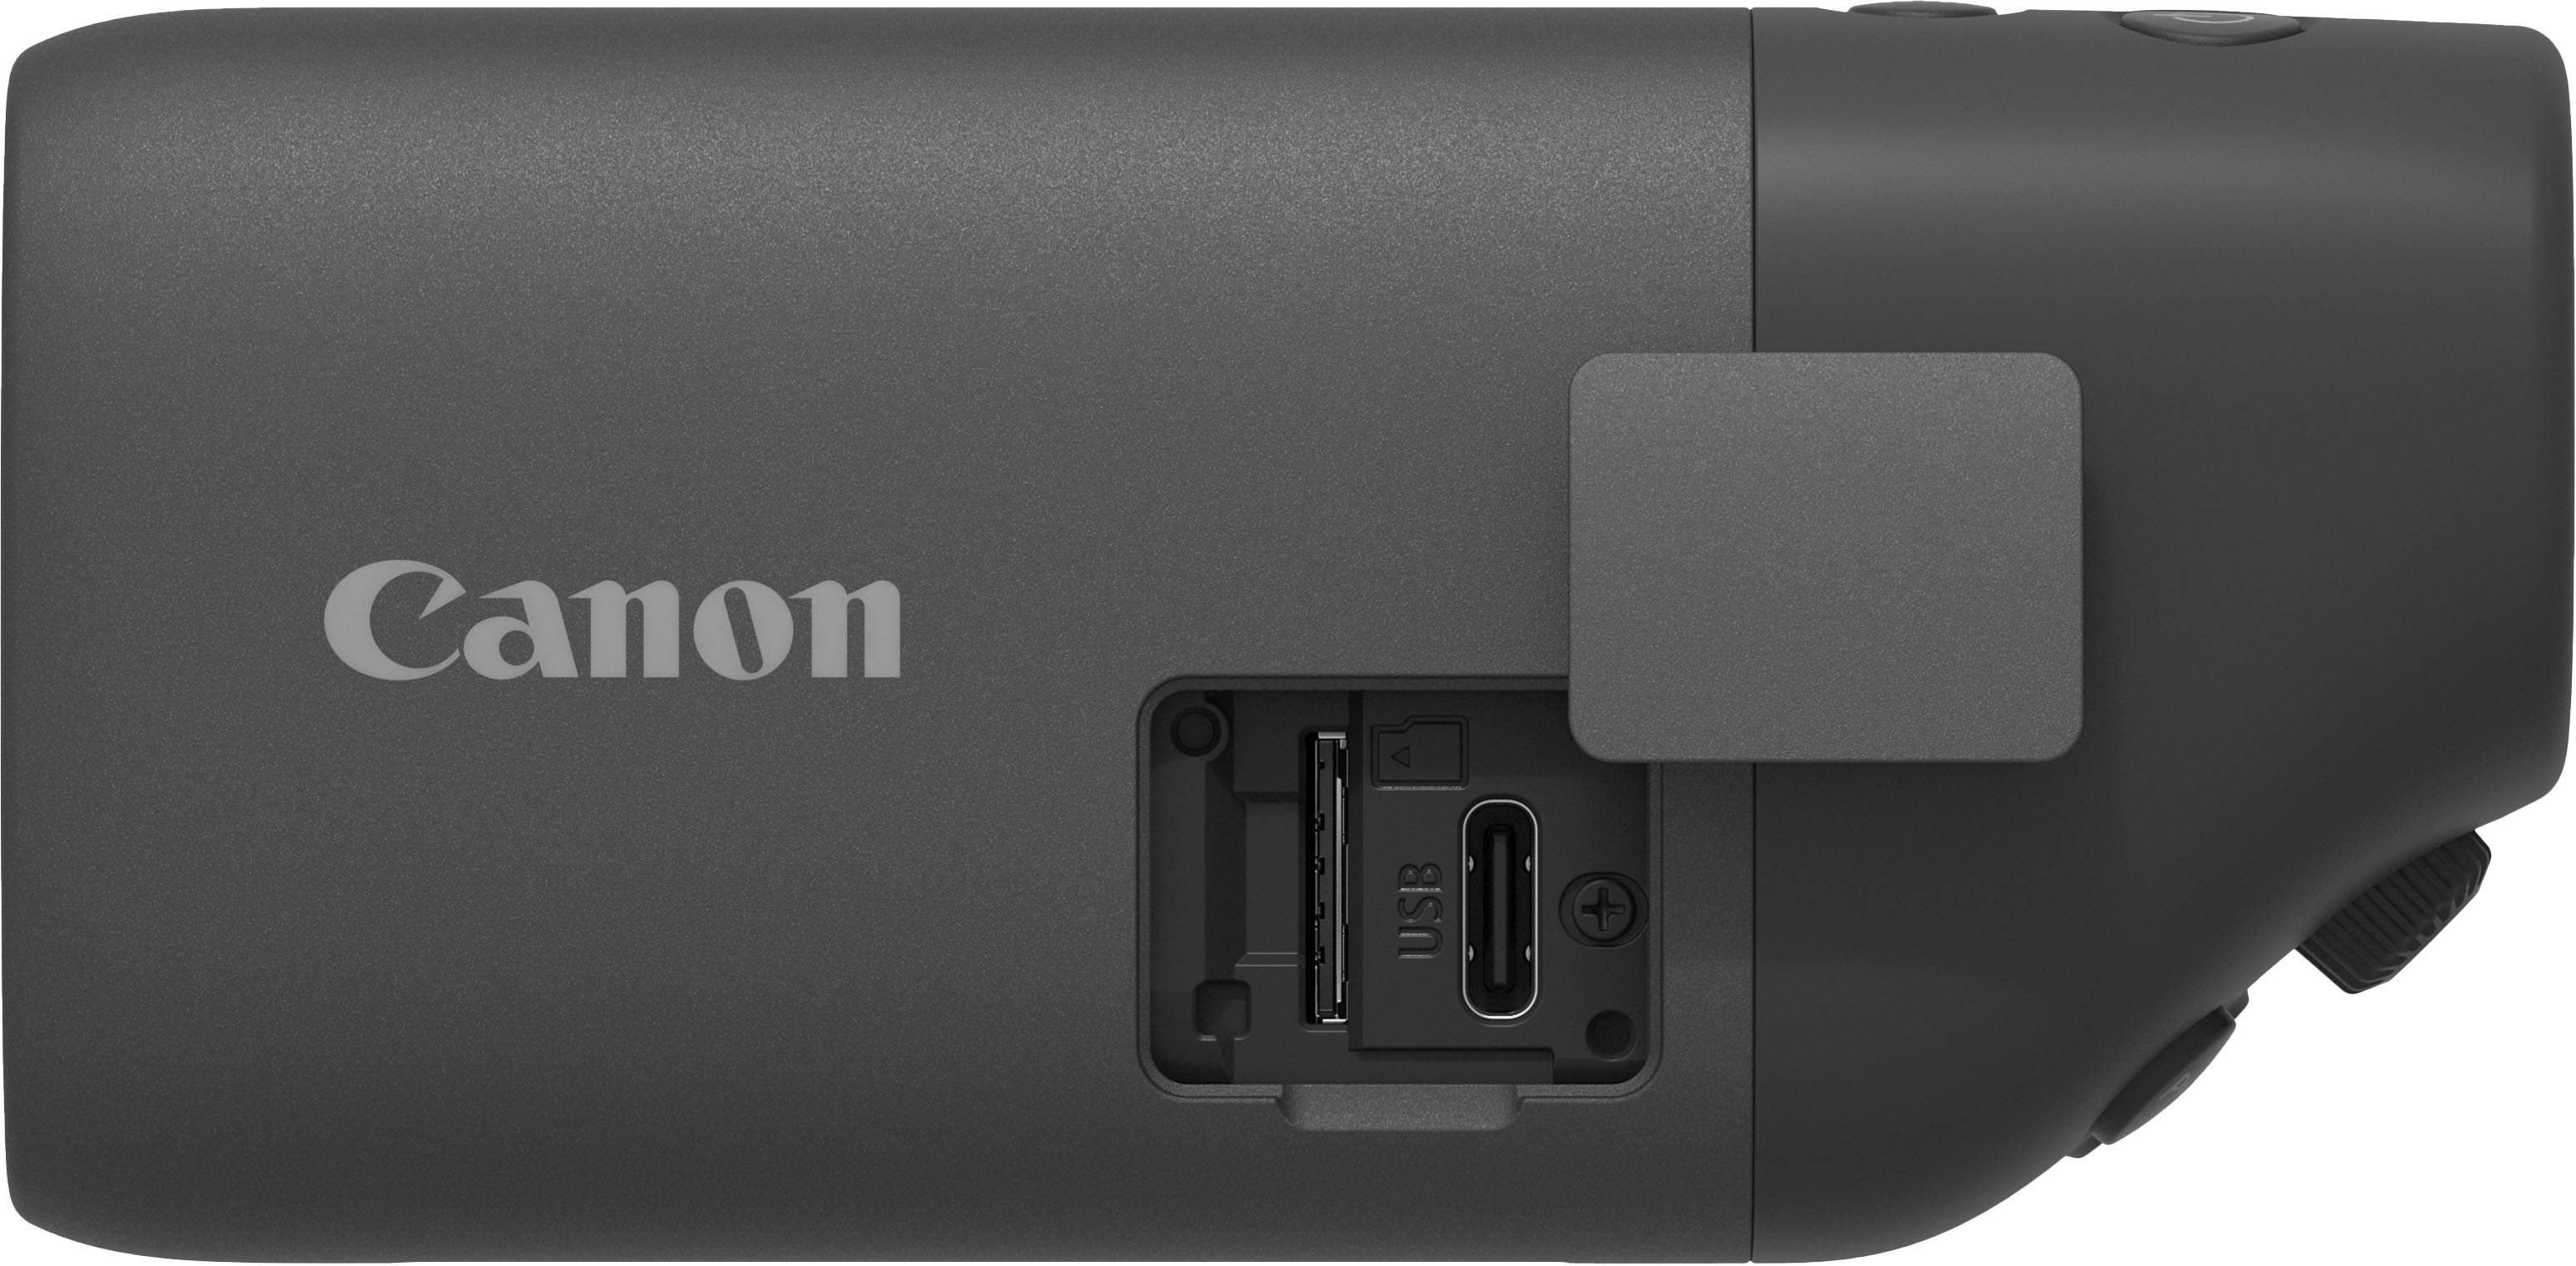 Angle View: Canon - CLI-42 Ink Cartridge - Gray